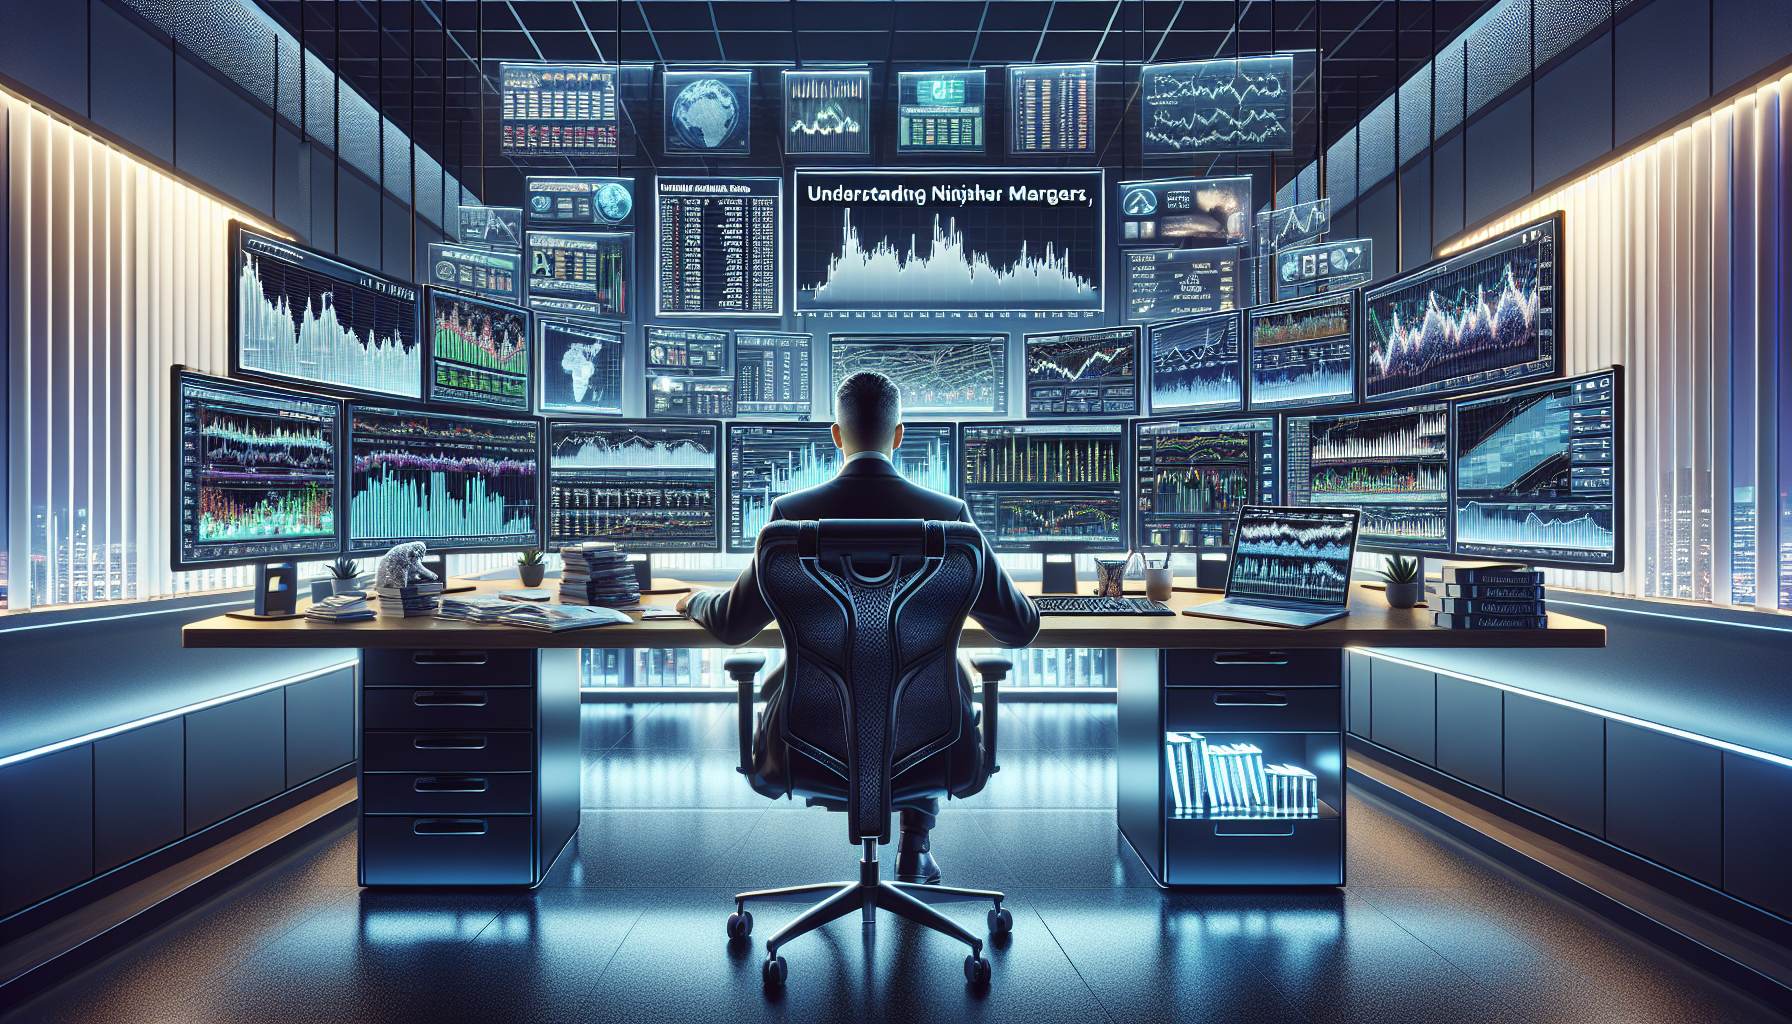 Create a detailed illustration showing a professional trader in front of multiple computer screens with charts, graphs, and financial data, representing the concept of 'Understanding NinjaTrader Margins.' Include elements like margin requirements, leverage, risk management symbols, and a focus on educational resources, all within a sleek, modern trading office environment.